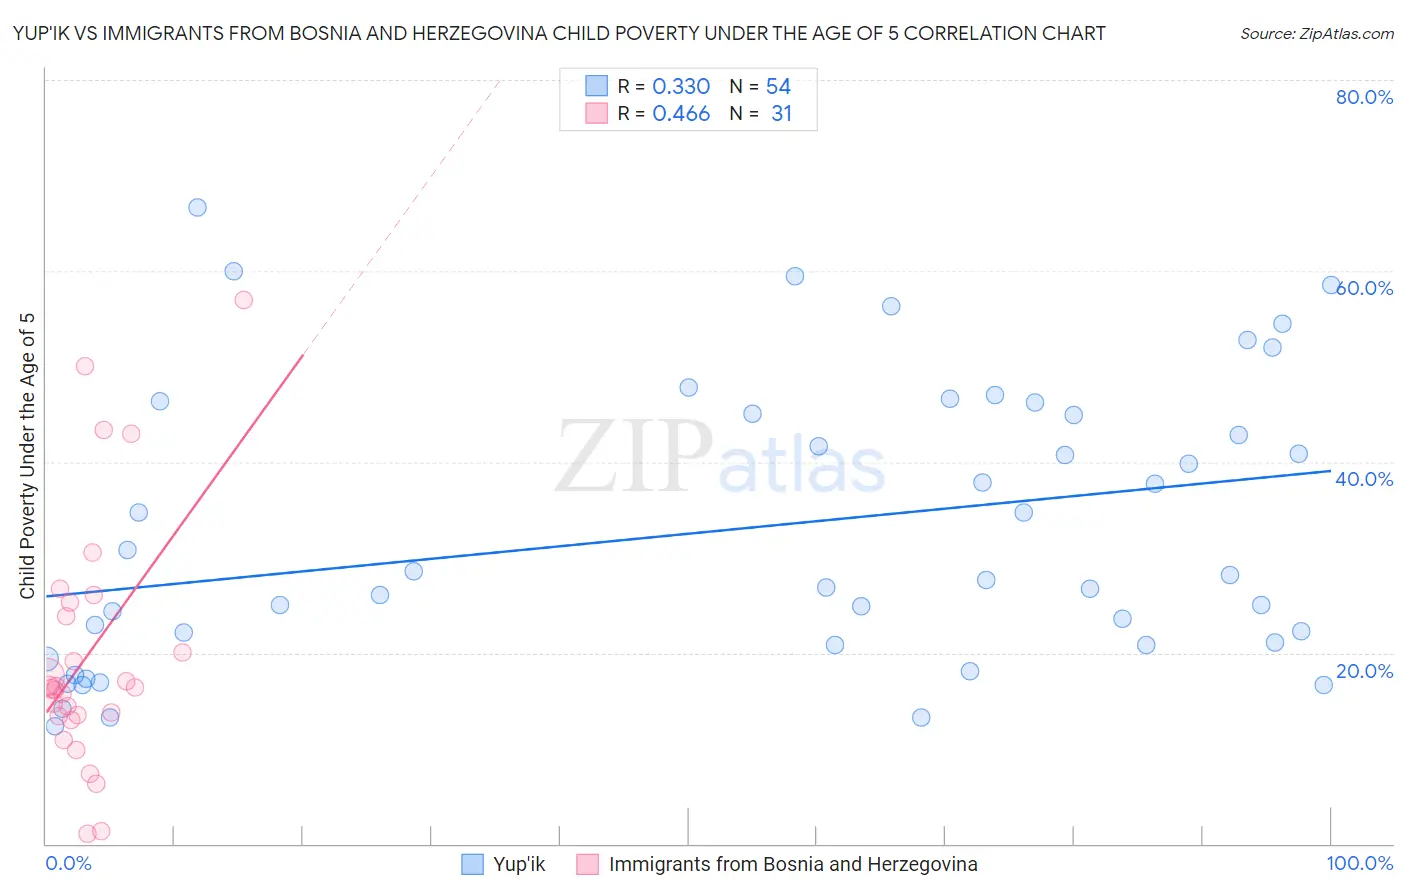 Yup'ik vs Immigrants from Bosnia and Herzegovina Child Poverty Under the Age of 5